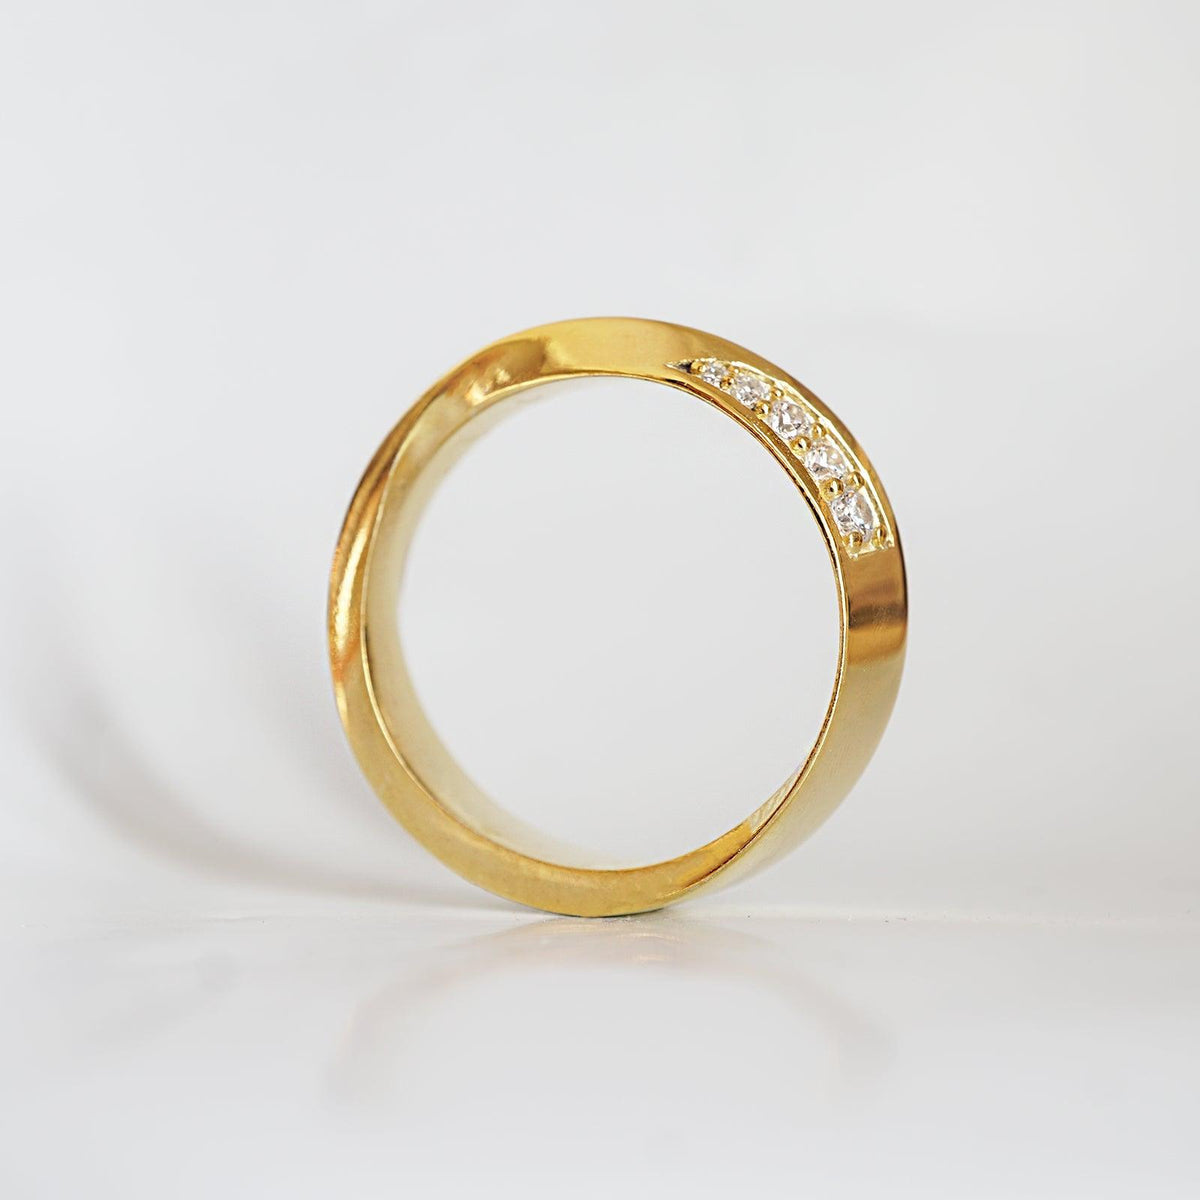 Spiral Diamond Ring in 14K and 18K Gold, 5mm - Tippy Taste Jewelry